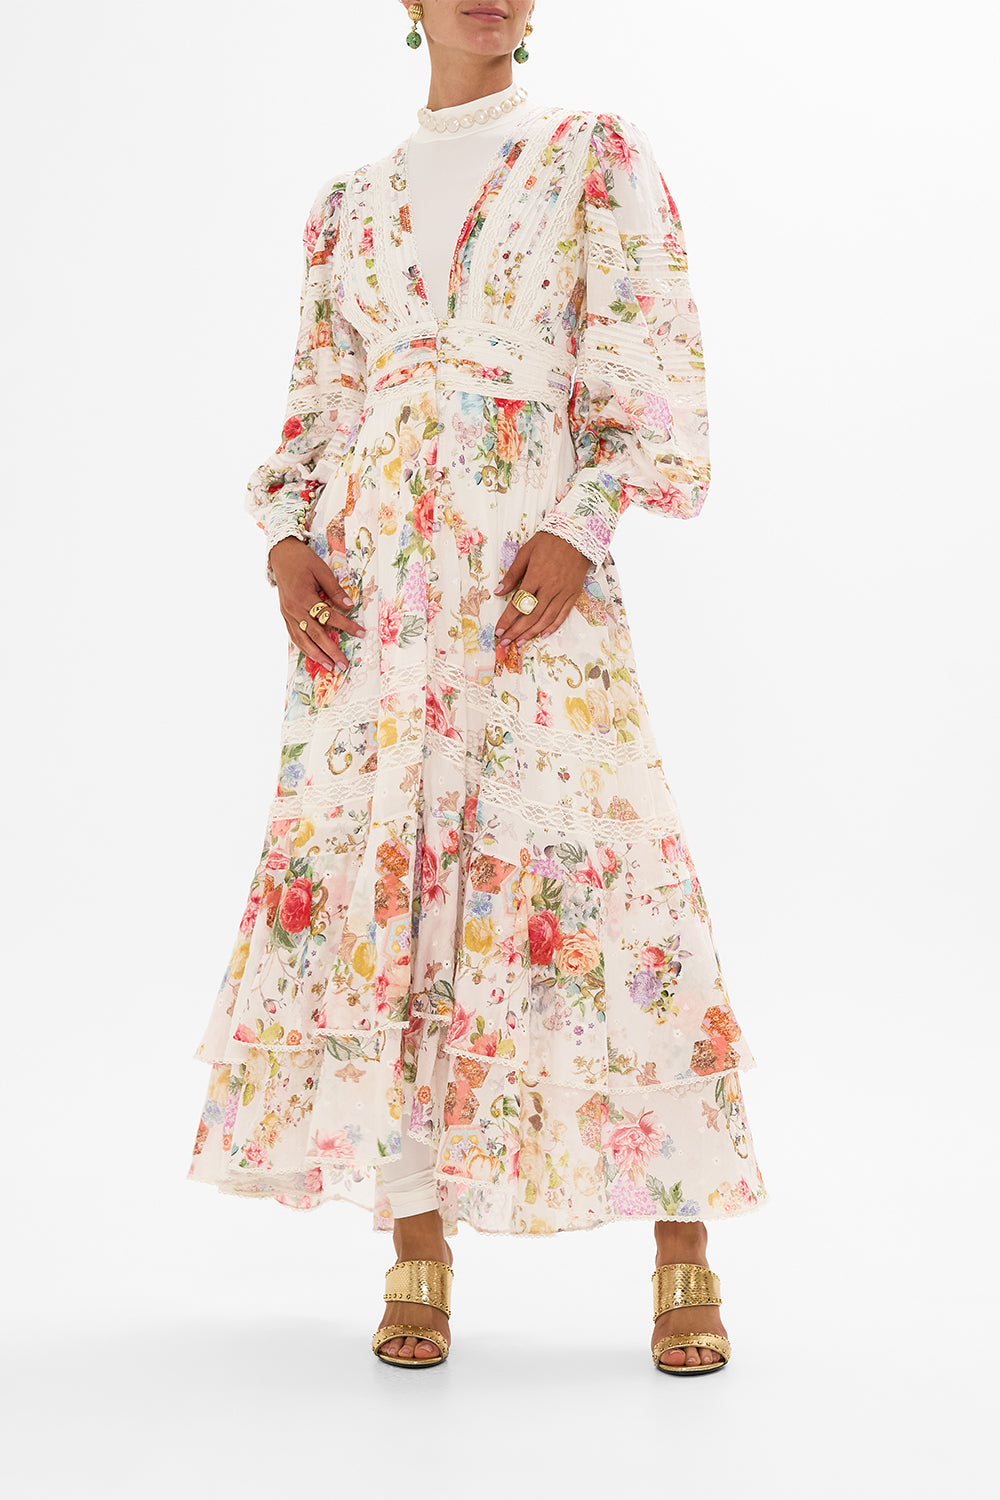 CAMILLA floral button front dress in Sew Yesterday print